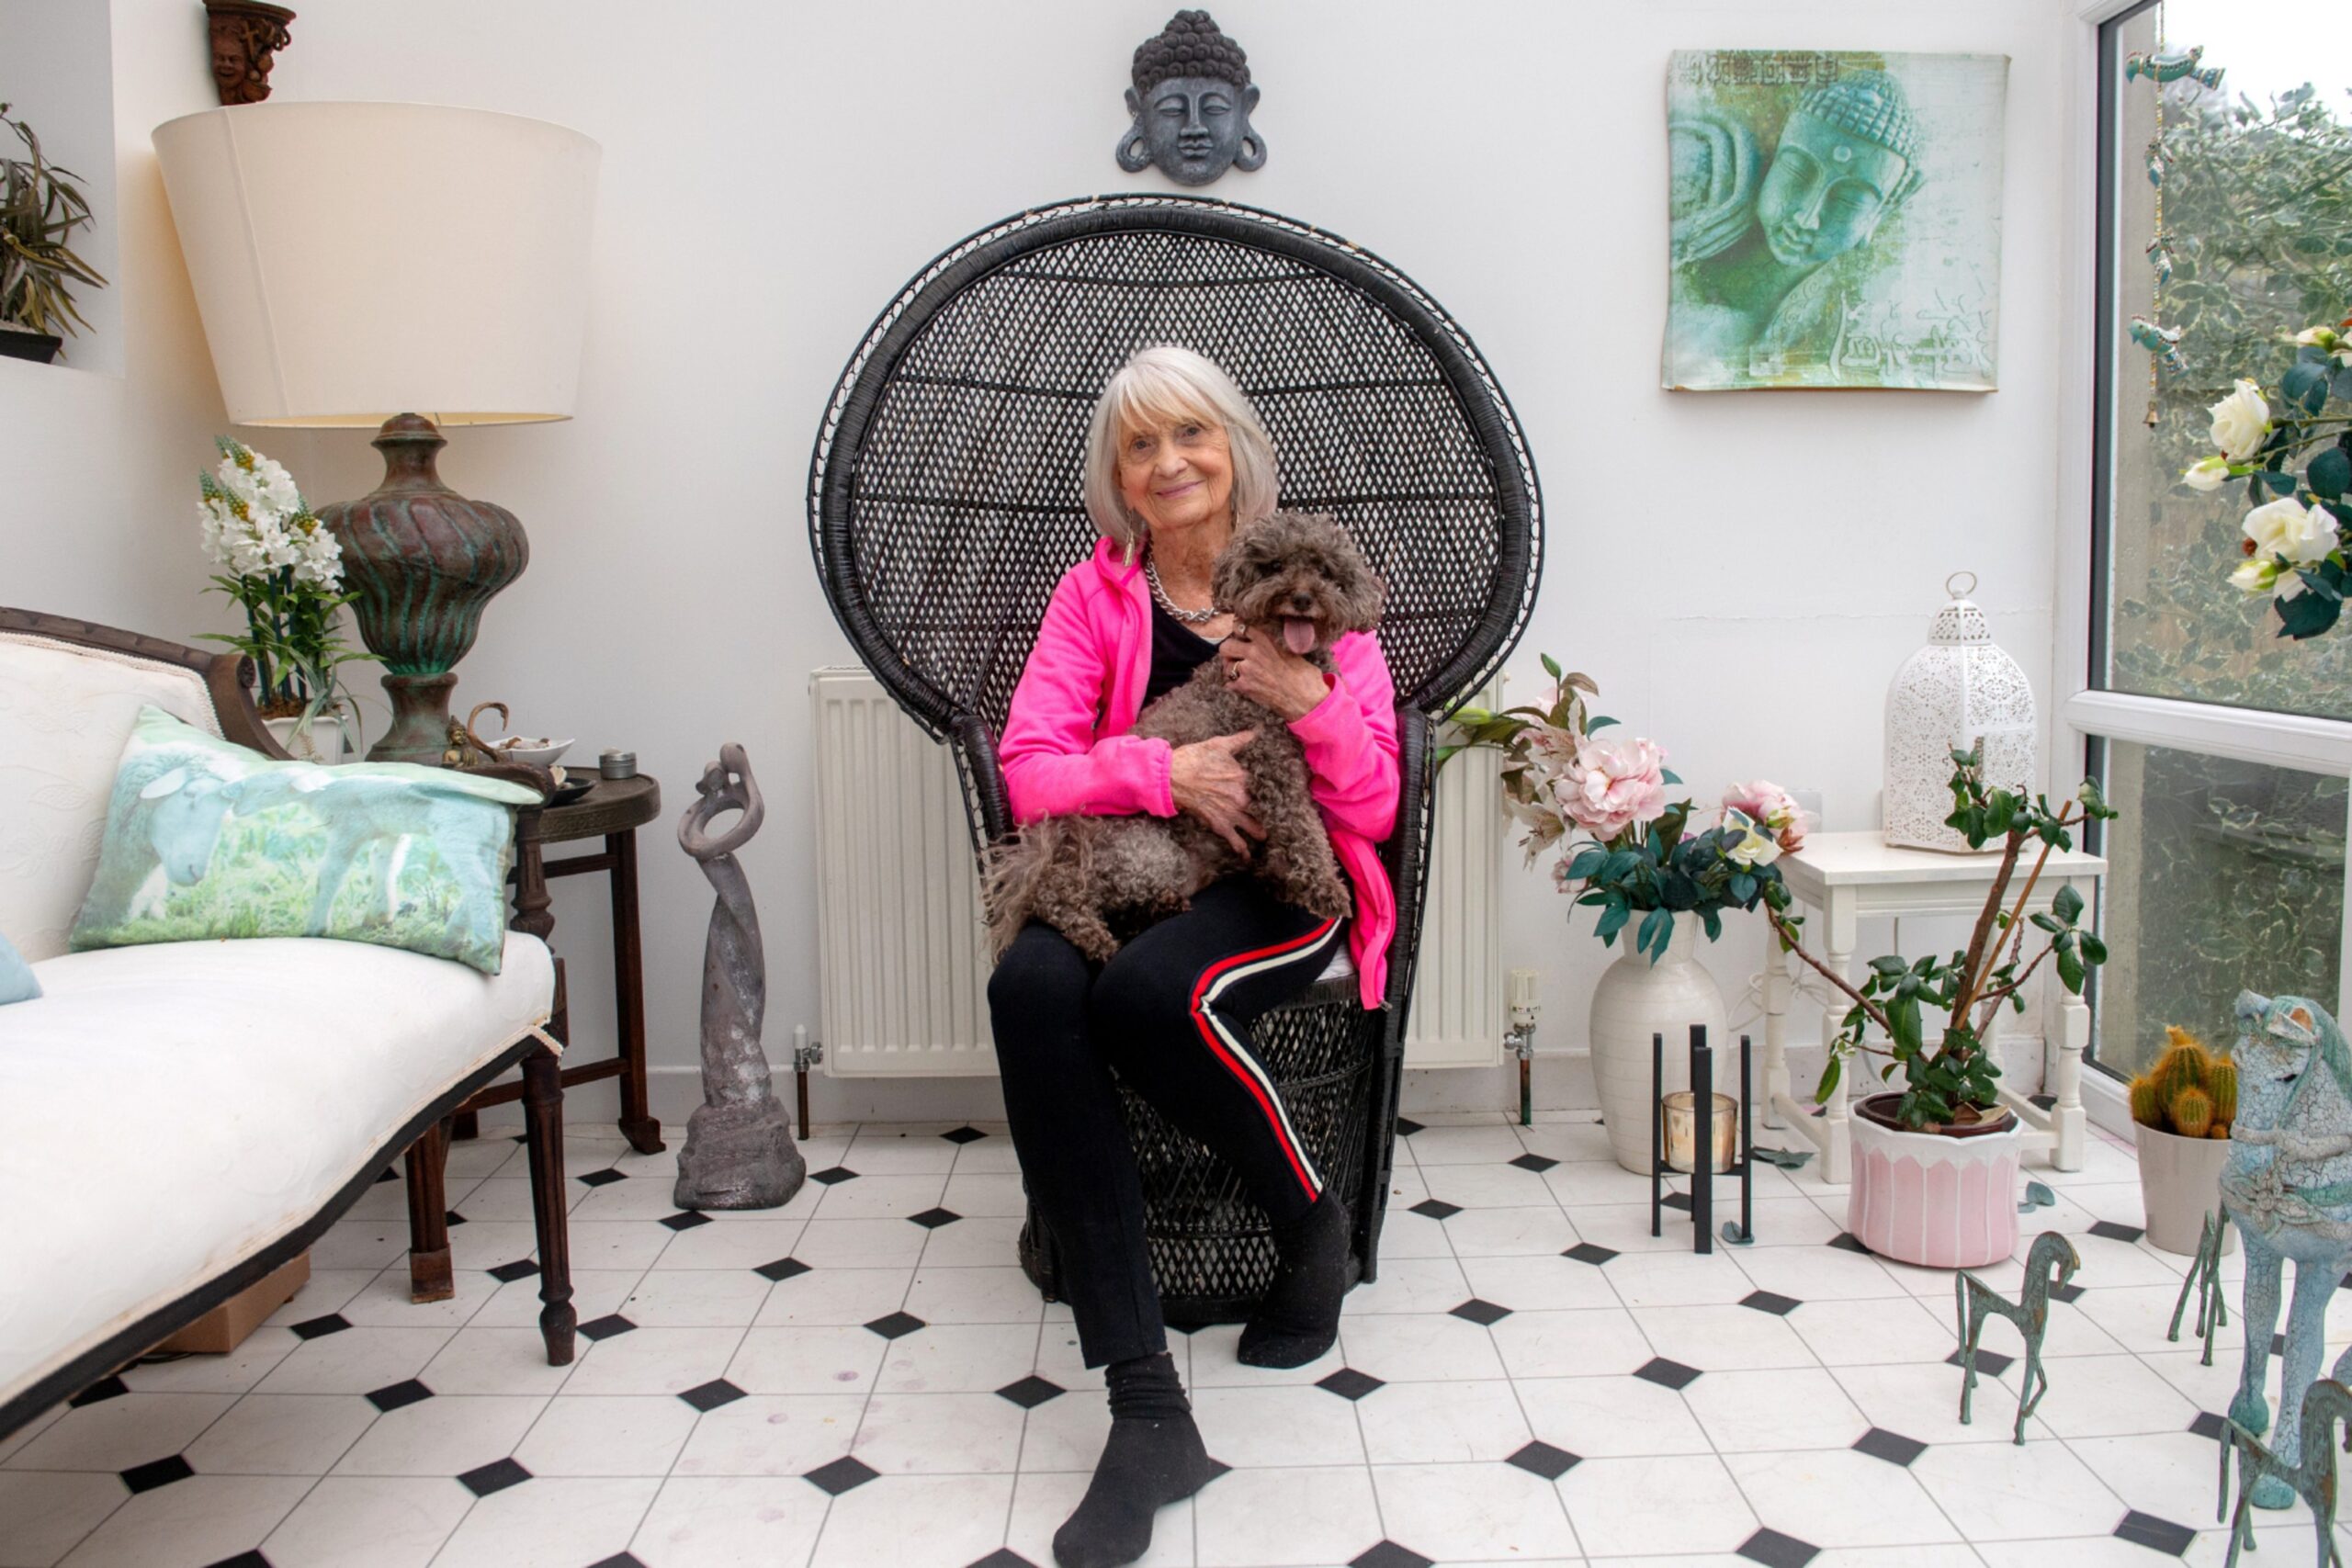 Jeane sitting on a large wicker chair with her dog ralph